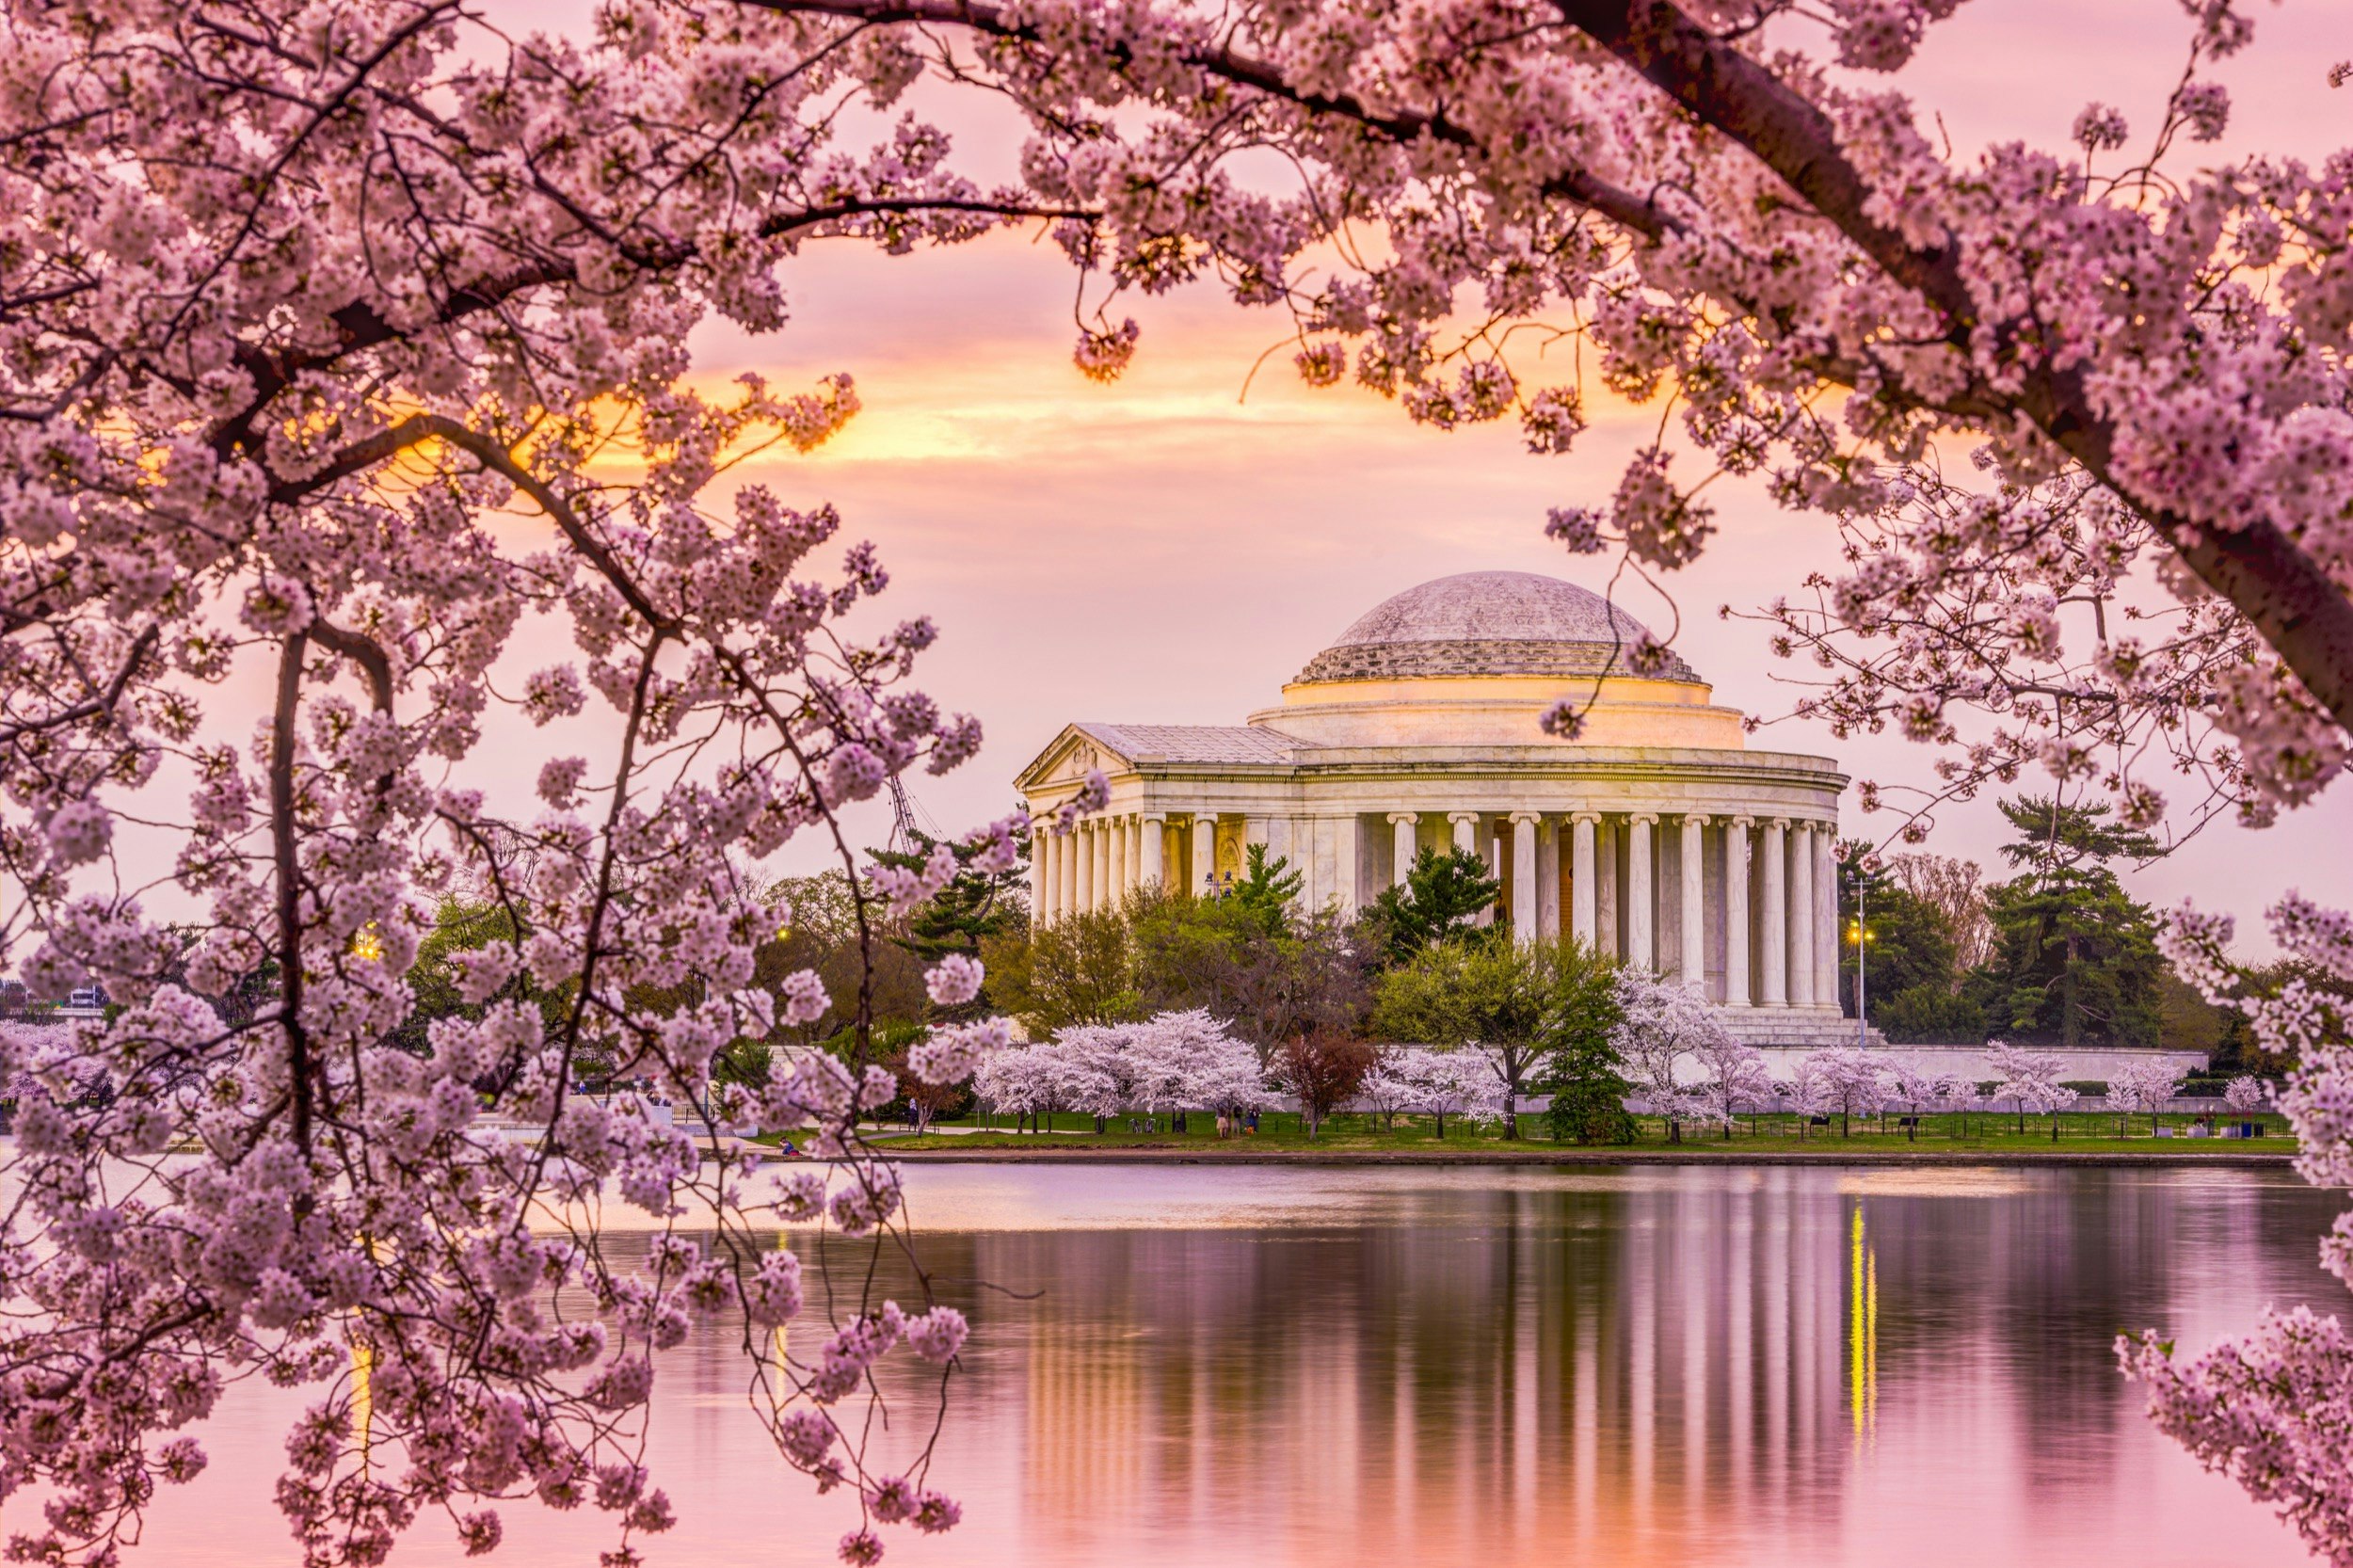 The domed rotunda of the Jefferson Memorial is reflected in the Potomac as a pink sky and cherry blossoms fill the sky; Best American architecture